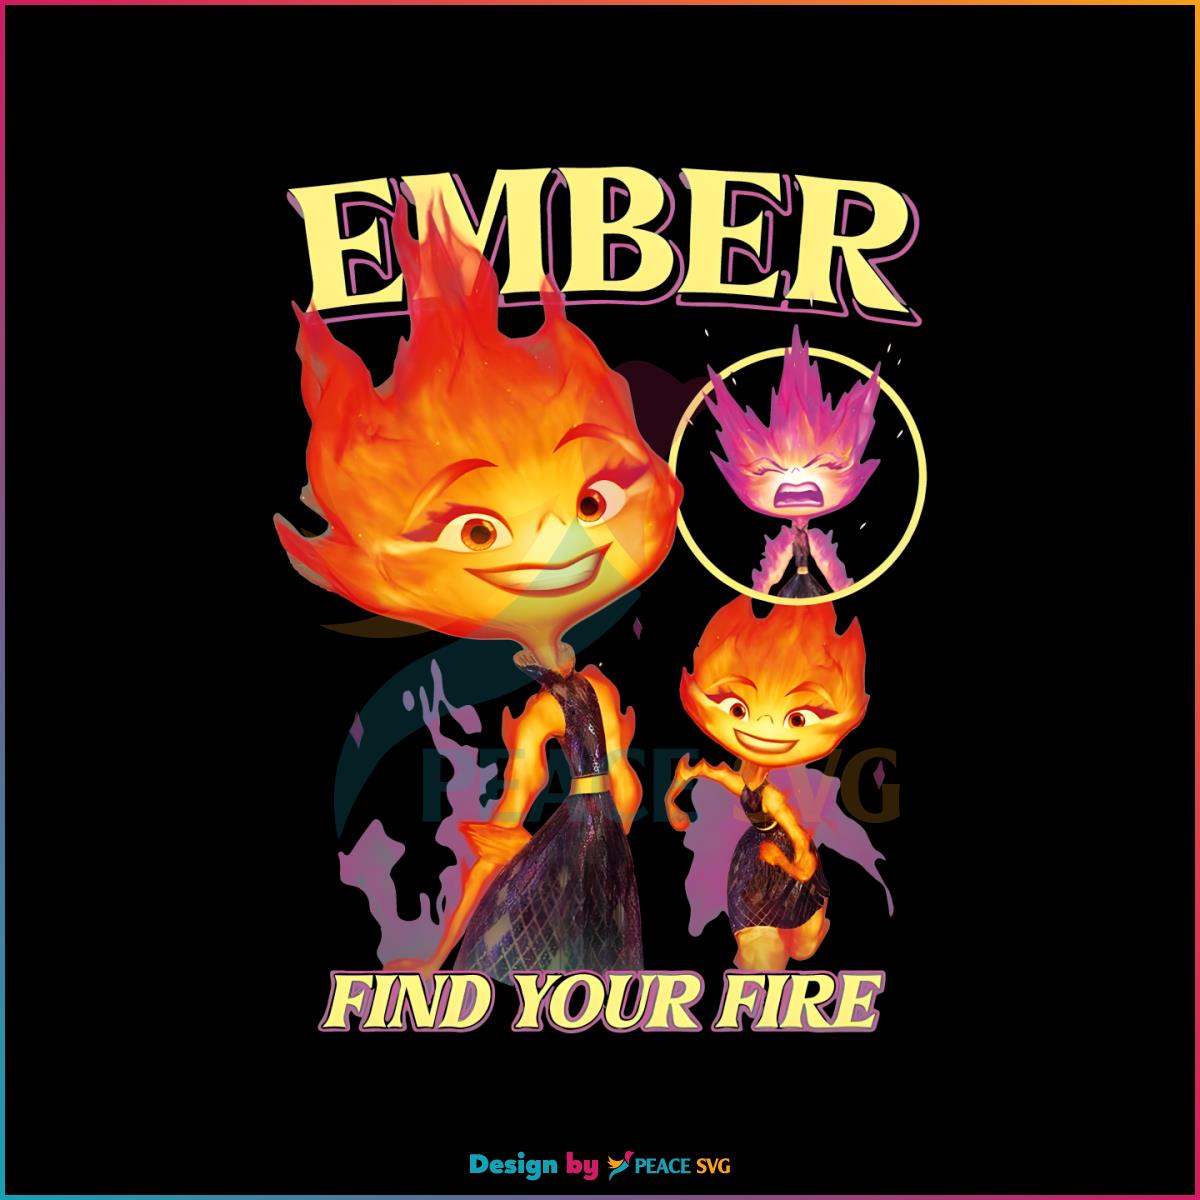 find-your-fire-ember-disney-pixars-elemental-png-silhouette-file